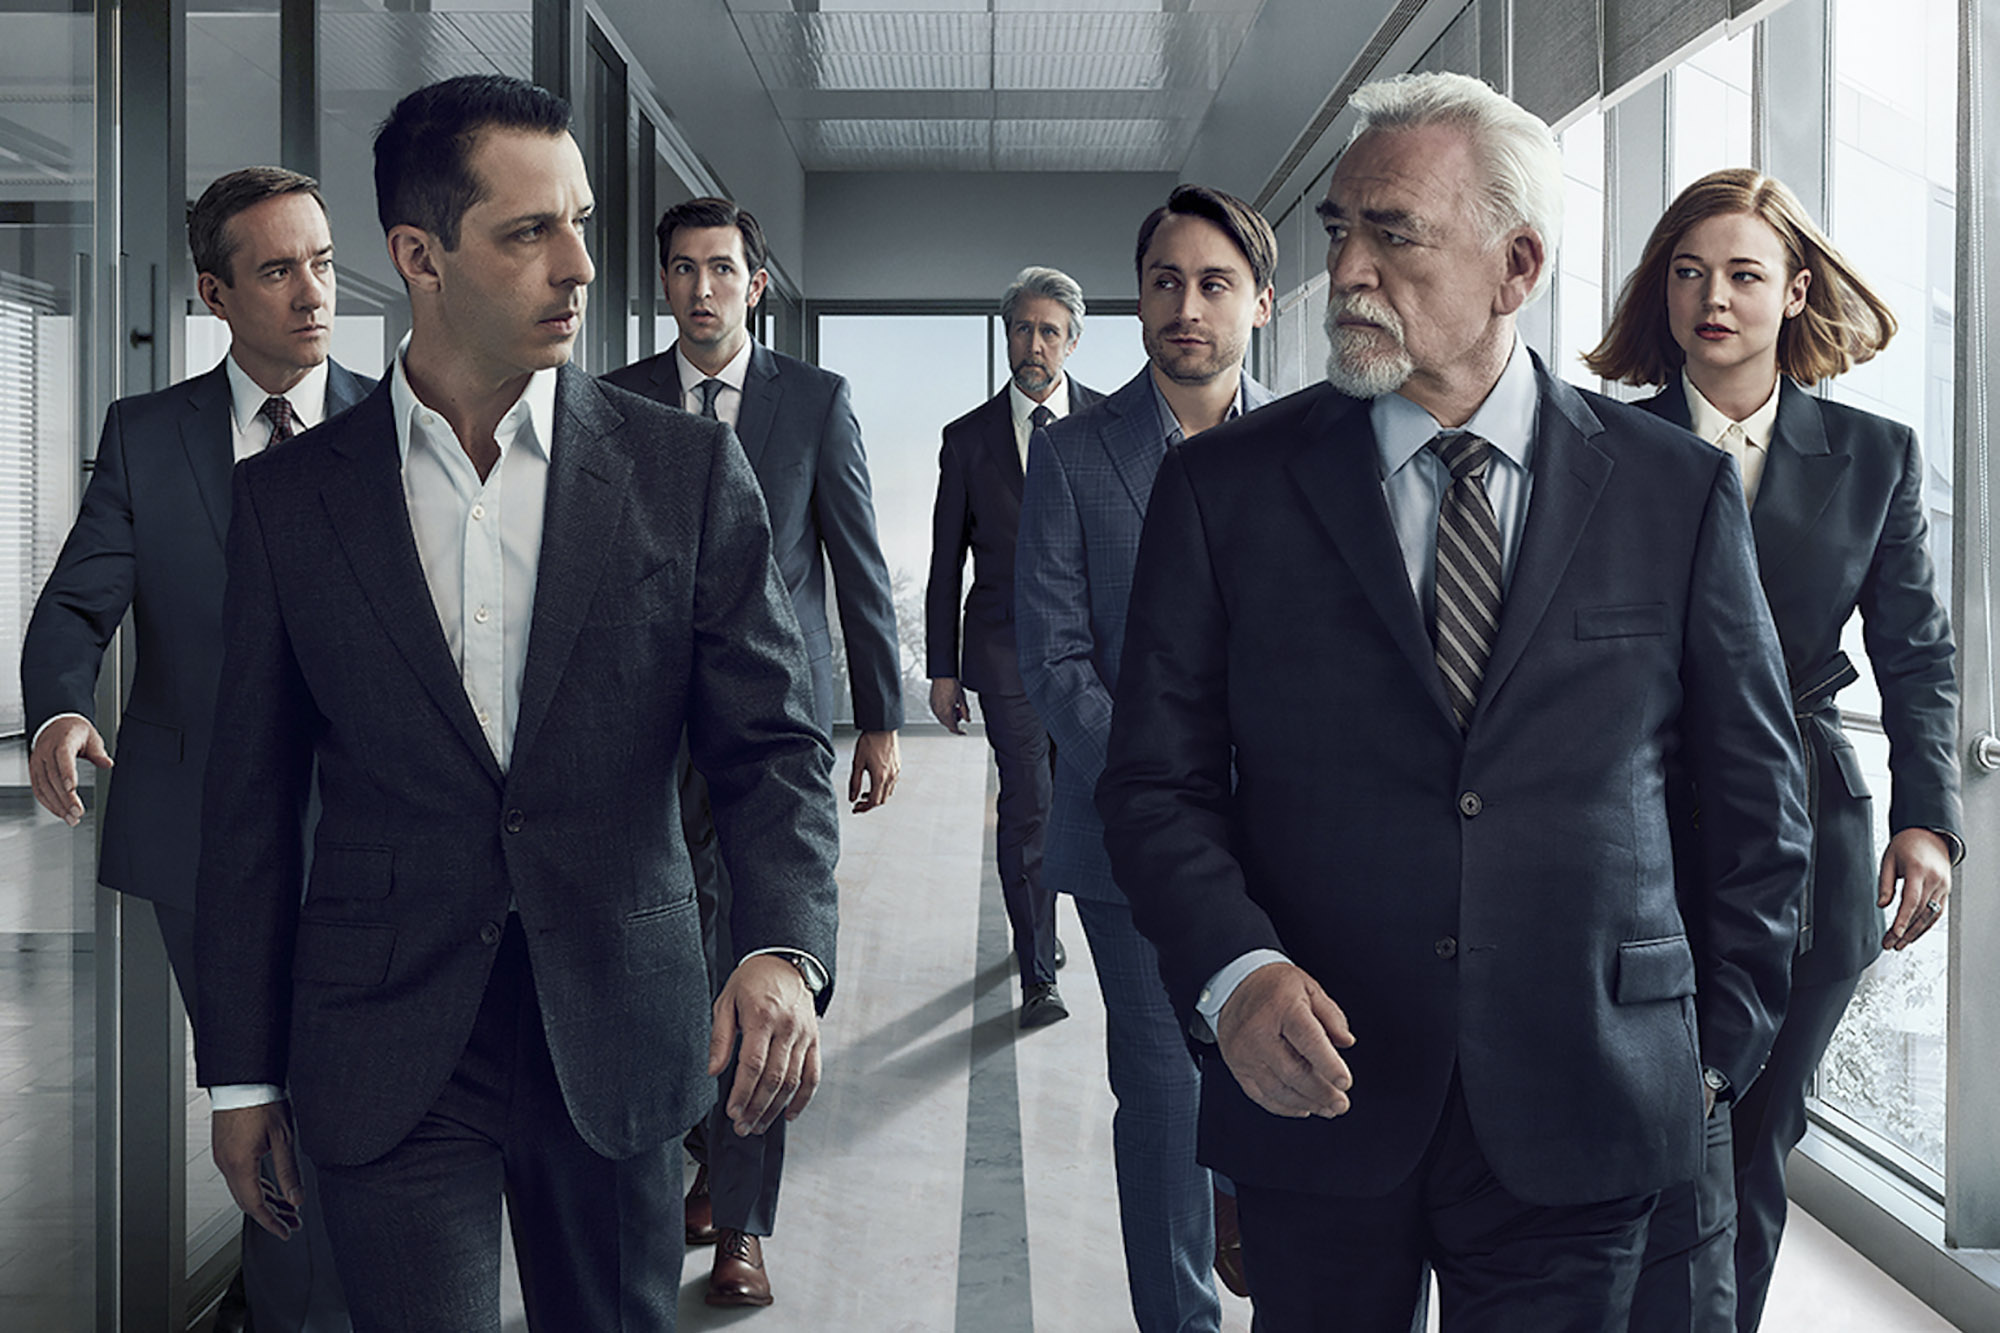 Group of business people walking down a hallway with upset looks on their faces and overly gray shadowing/coloring